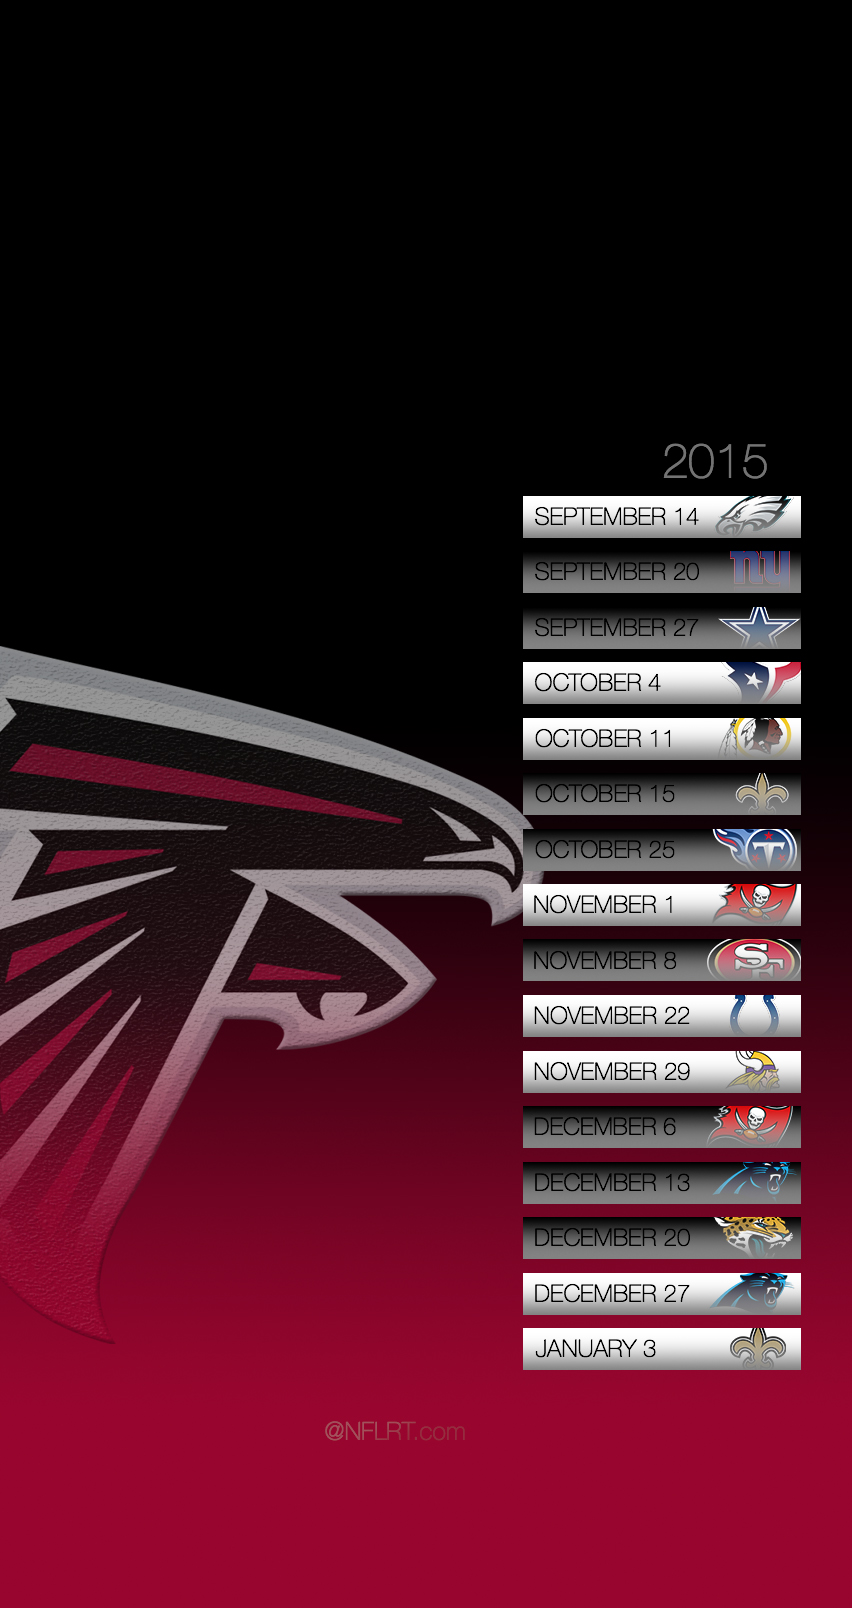 2015 NFL Schedule Wallpapers   Page 6 of 8   NFLRT